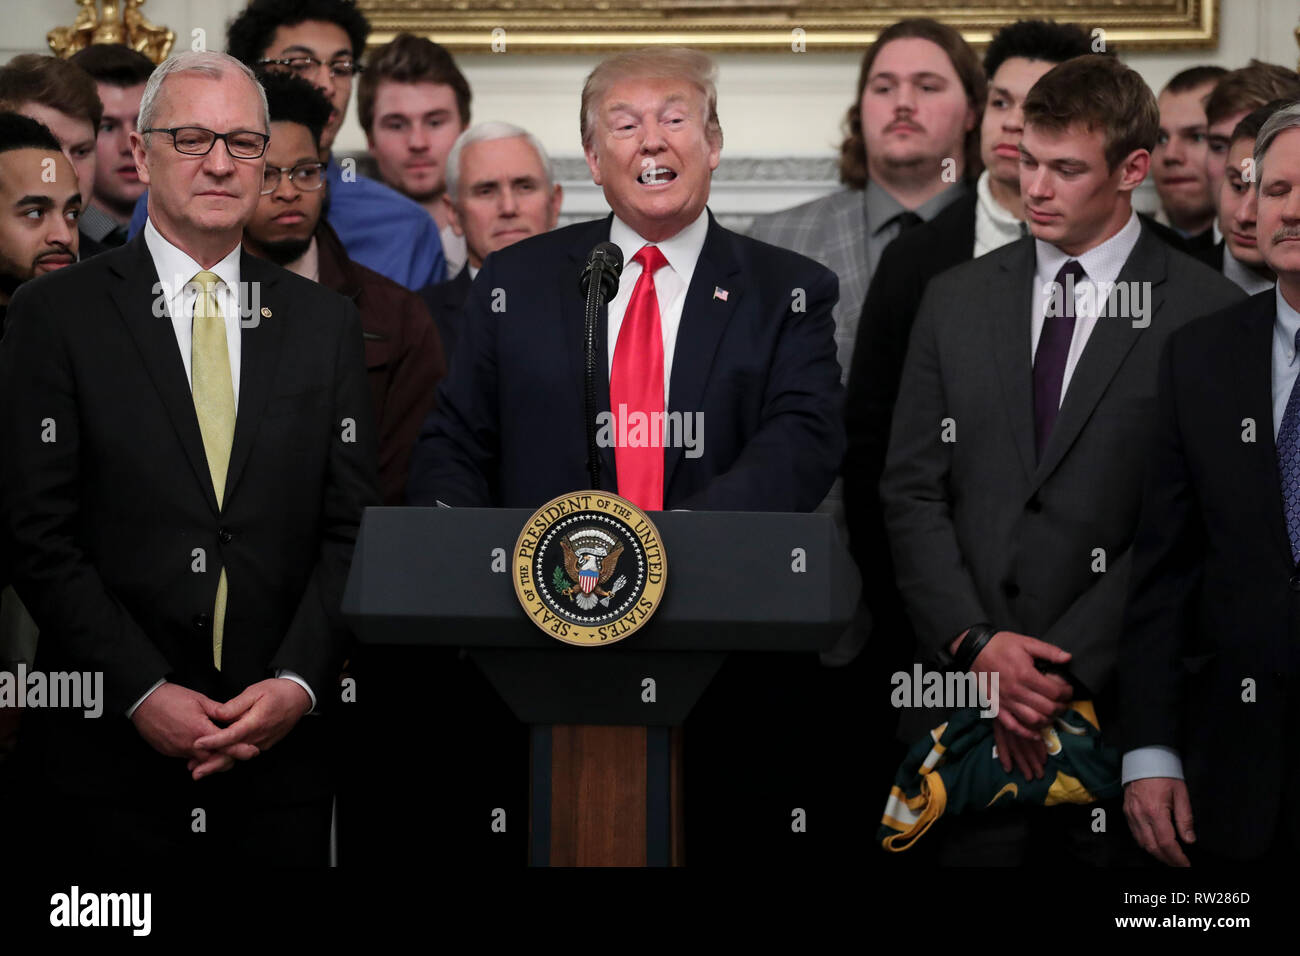 United States President Donald J. Trump participates in a photo opportunity with the 2018 Division I FCS National Champions: The North Dakota State Bison in the State Dining Room of the White House on March 4, 2019 in Washington, DC. Credit: Oliver Contreras / Pool via CNP | usage worldwide Stock Photo